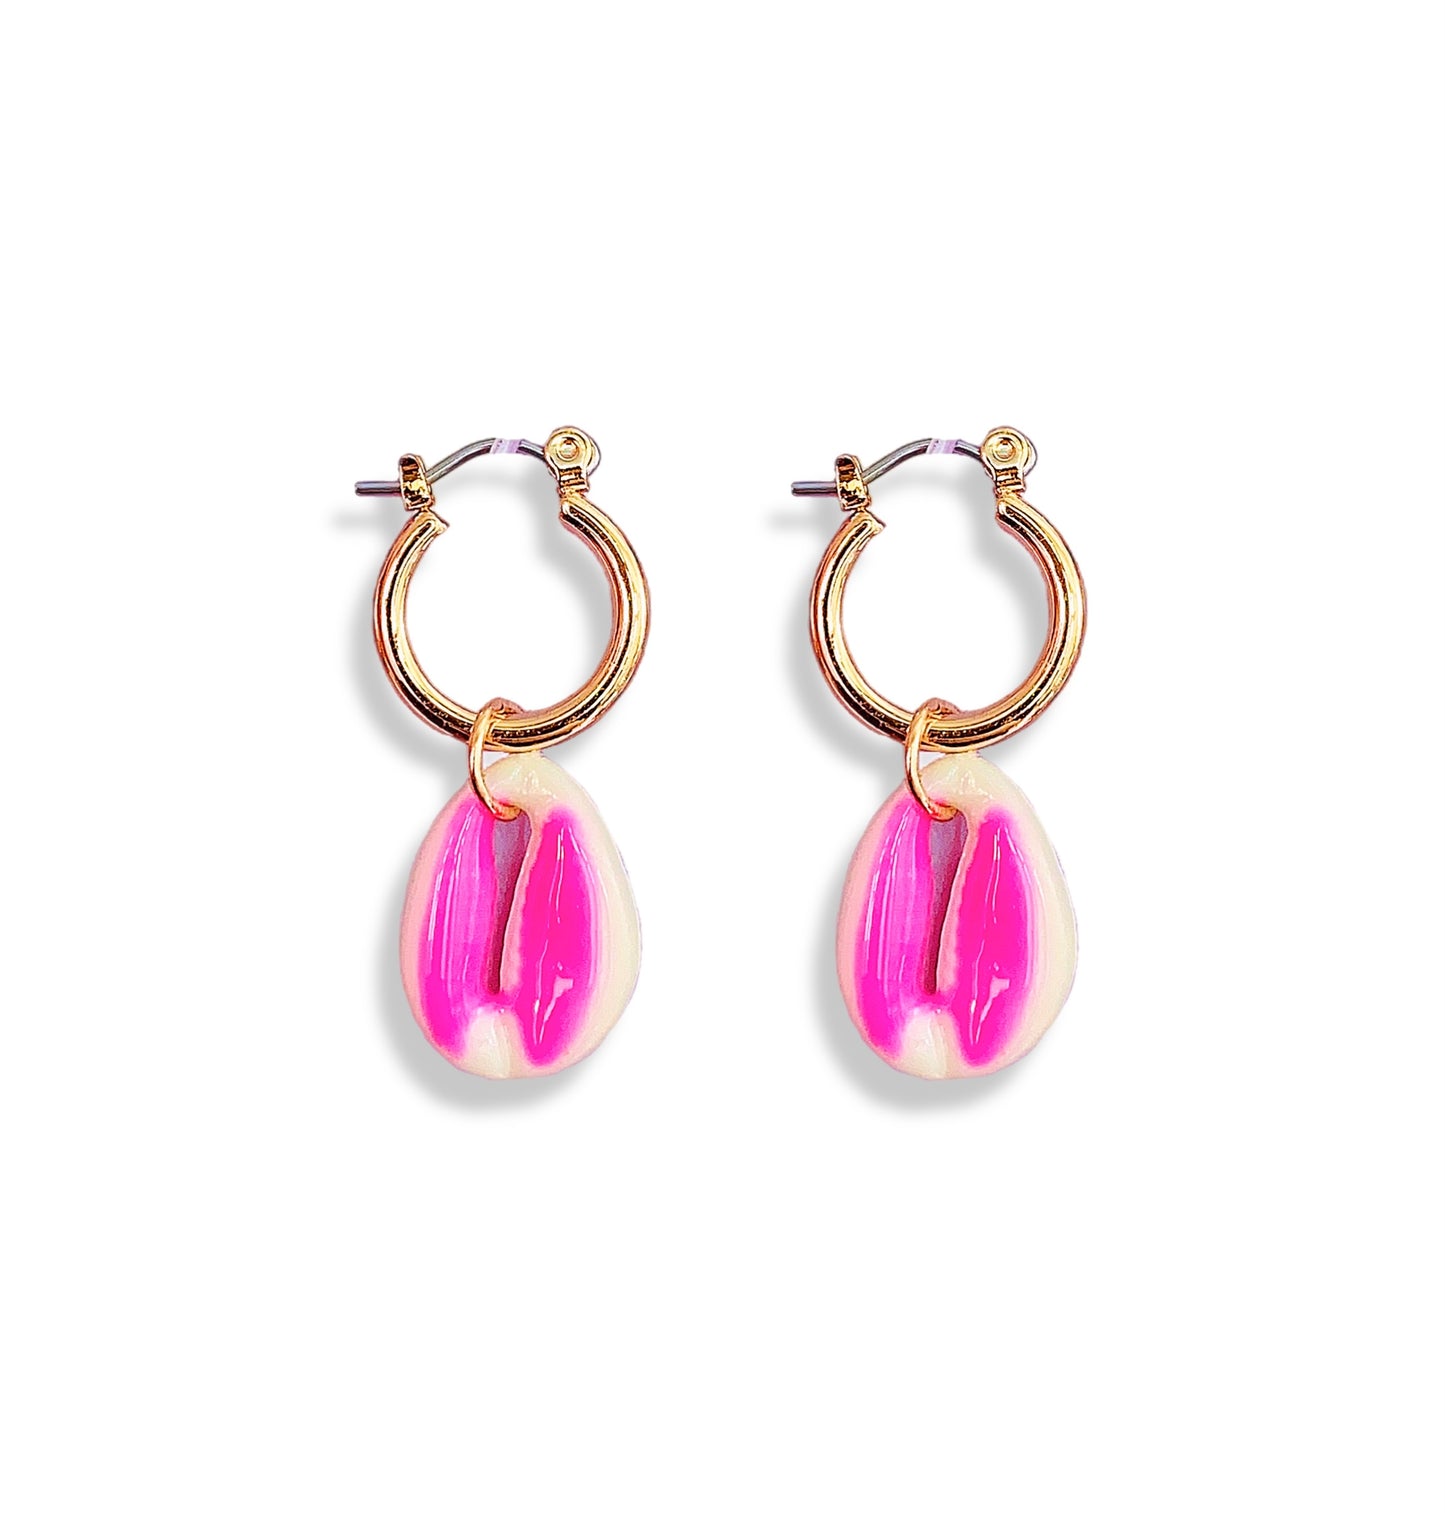 Small Huggie Earrings with Pink Shell Charm